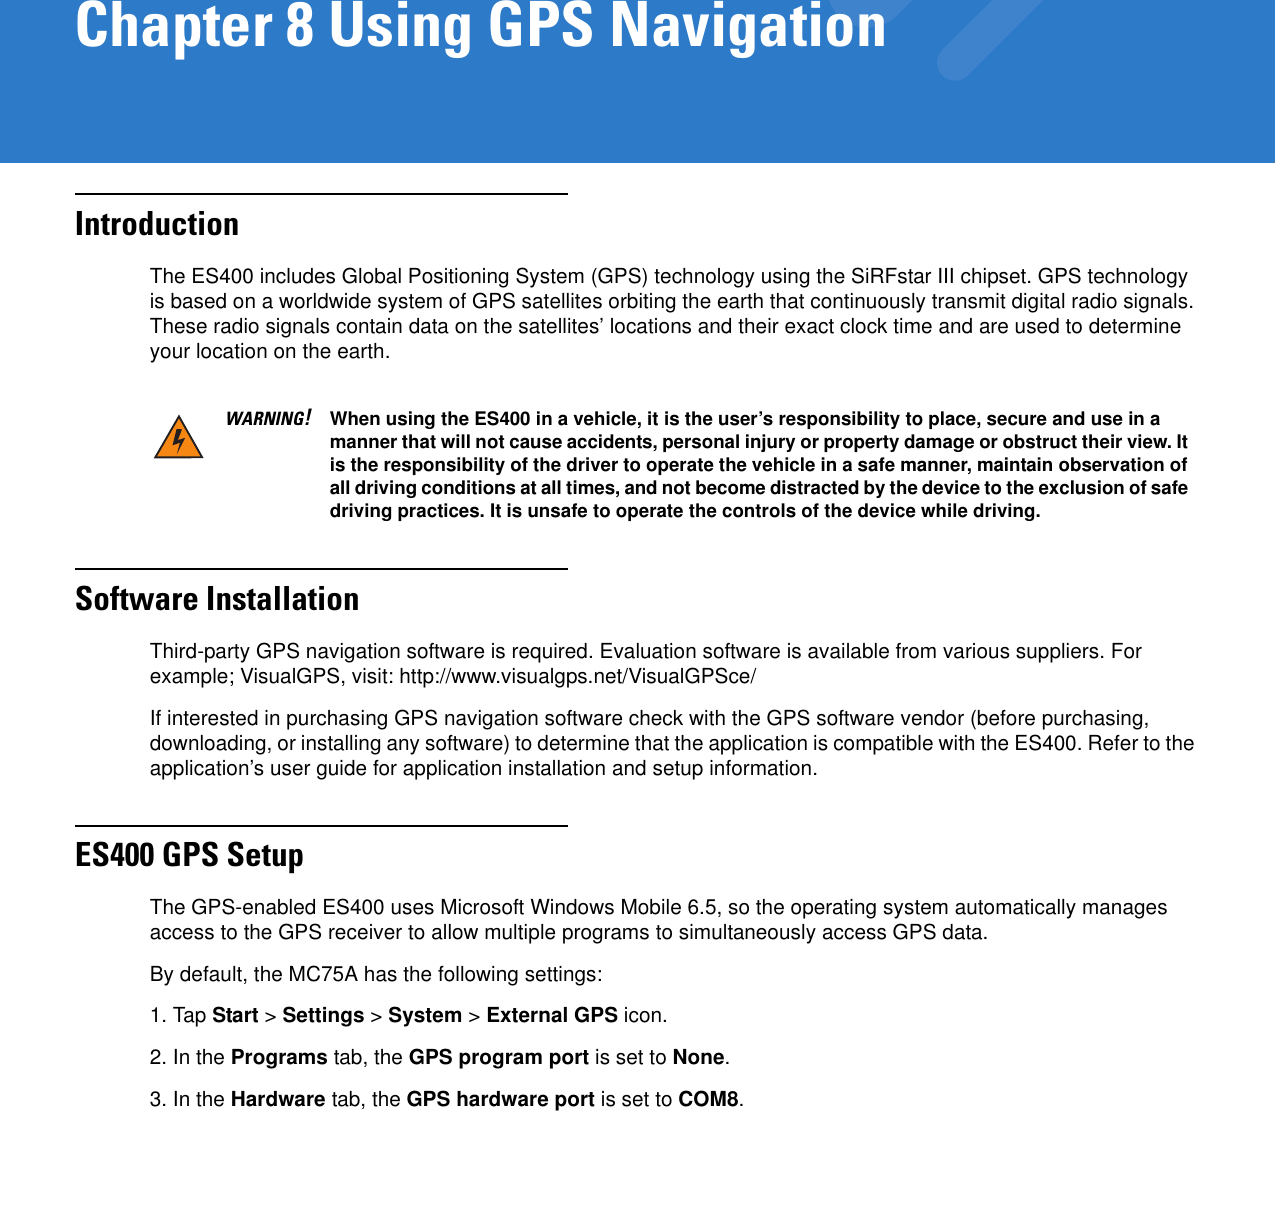 Chapter 8 Using GPS NavigationIntroductionThe ES400 includes Global Positioning System (GPS) technology using the SiRFstar III chipset. GPS technology is based on a worldwide system of GPS satellites orbiting the earth that continuously transmit digital radio signals. These radio signals contain data on the satellites’ locations and their exact clock time and are used to determine your location on the earth.Software InstallationThird-party GPS navigation software is required. Evaluation software is available from various suppliers. For example; VisualGPS, visit: http://www.visualgps.net/VisualGPSce/If interested in purchasing GPS navigation software check with the GPS software vendor (before purchasing, downloading, or installing any software) to determine that the application is compatible with the ES400. Refer to the application’s user guide for application installation and setup information.ES400 GPS SetupThe GPS-enabled ES400 uses Microsoft Windows Mobile 6.5, so the operating system automatically manages access to the GPS receiver to allow multiple programs to simultaneously access GPS data.By default, the MC75A has the following settings:1. Tap Start &gt; Settings &gt; System &gt; External GPS icon.2. In the Programs tab, the GPS program port is set to None.3. In the Hardware tab, the GPS hardware port is set to COM8.WARNING!When using the ES400 in a vehicle, it is the user’s responsibility to place, secure and use in a manner that will not cause accidents, personal injury or property damage or obstruct their view. It is the responsibility of the driver to operate the vehicle in a safe manner, maintain observation of all driving conditions at all times, and not become distracted by the device to the exclusion of safe driving practices. It is unsafe to operate the controls of the device while driving.